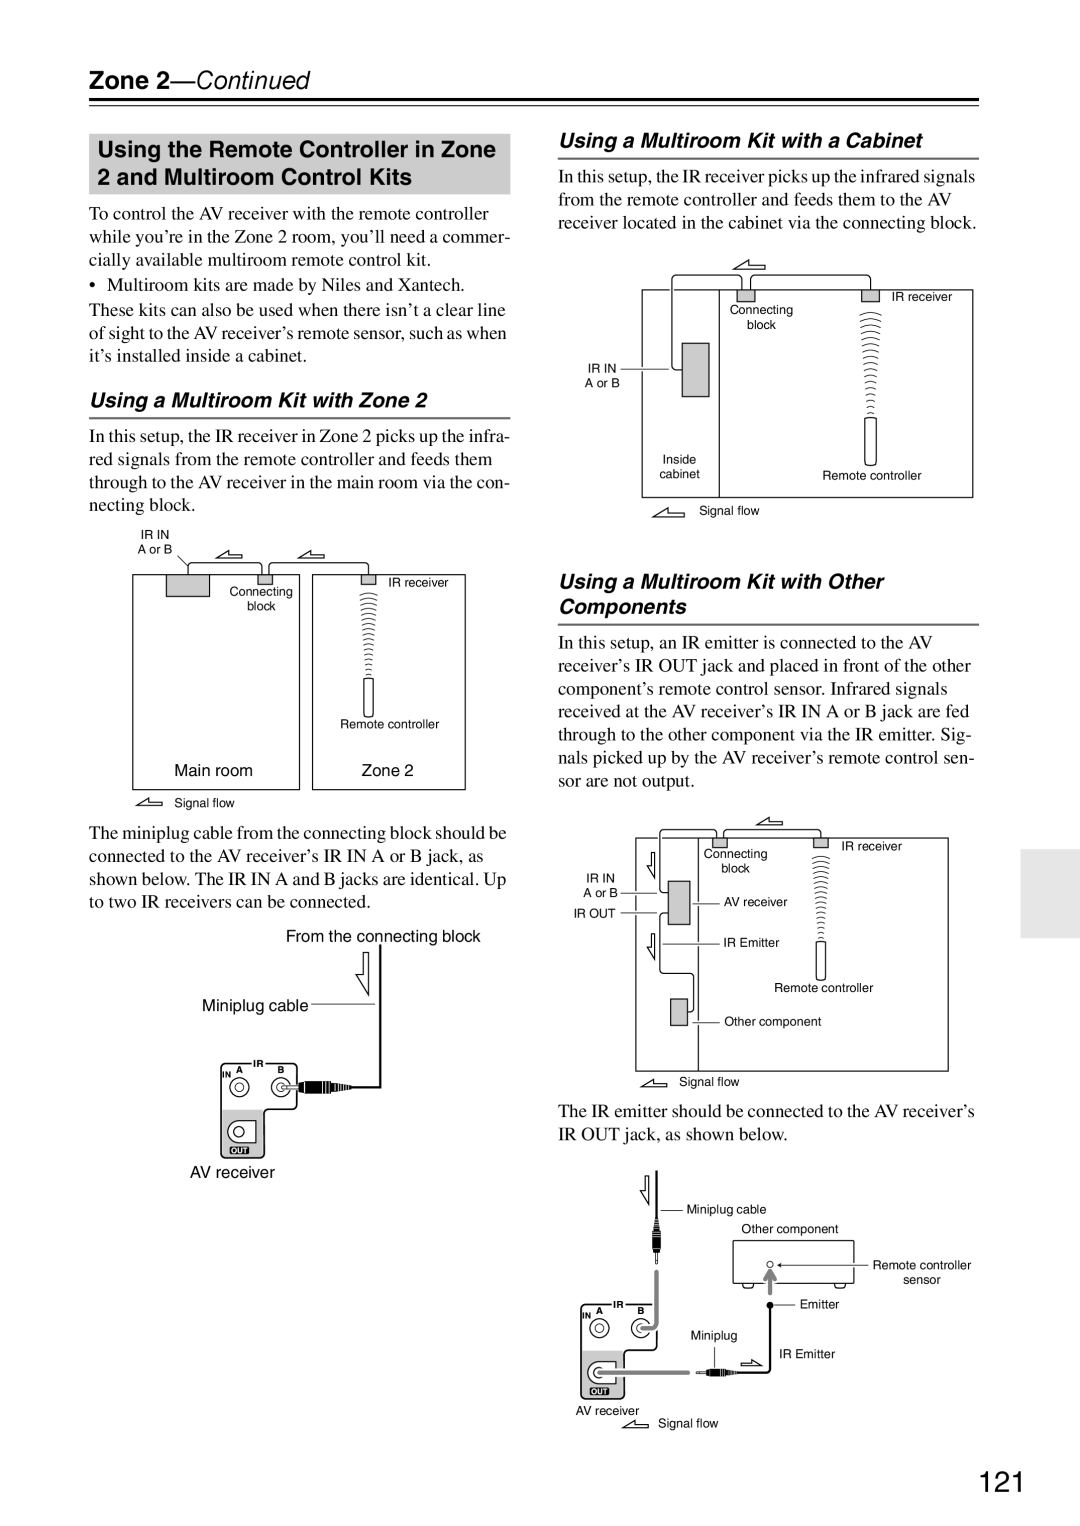 Onkyo DTR-7.9 instruction manual Using a Multiroom Kit with a Cabinet, Using a Multiroom Kit with Zone, Zone 2—Continued 